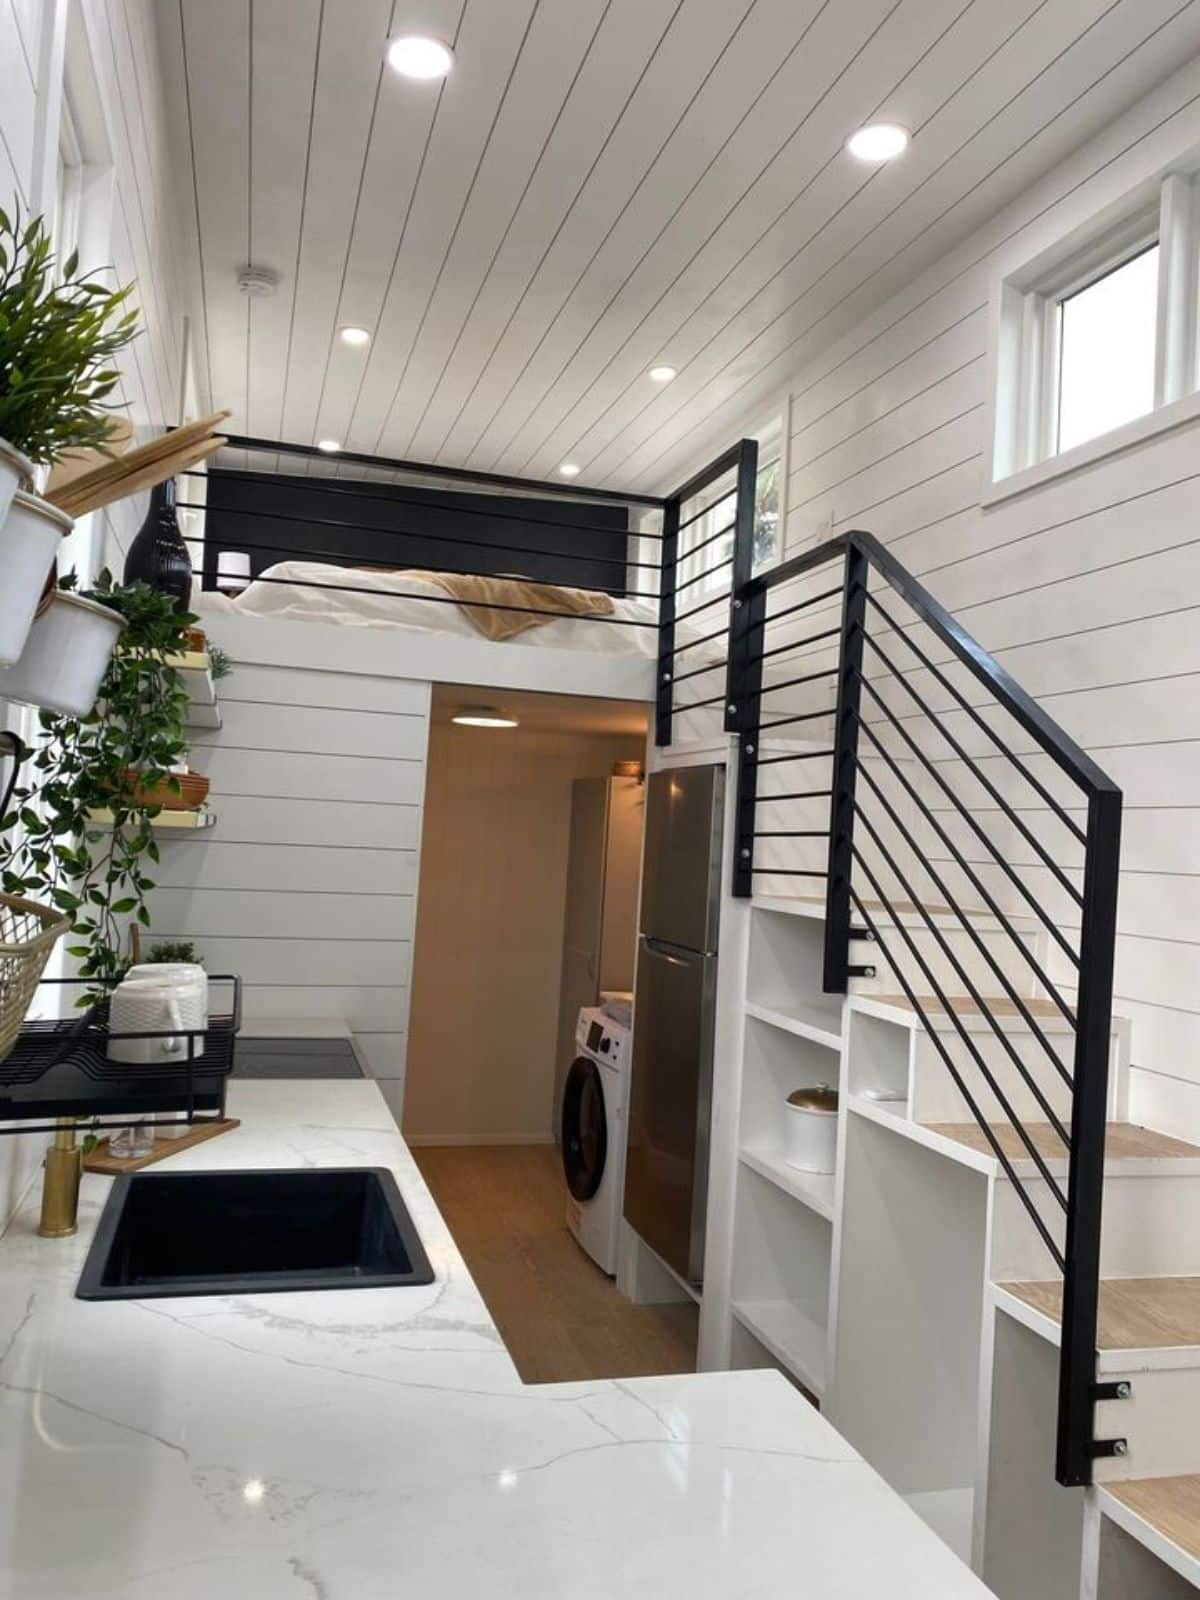 Big loft is accessible via stairs with railings and storage underneath